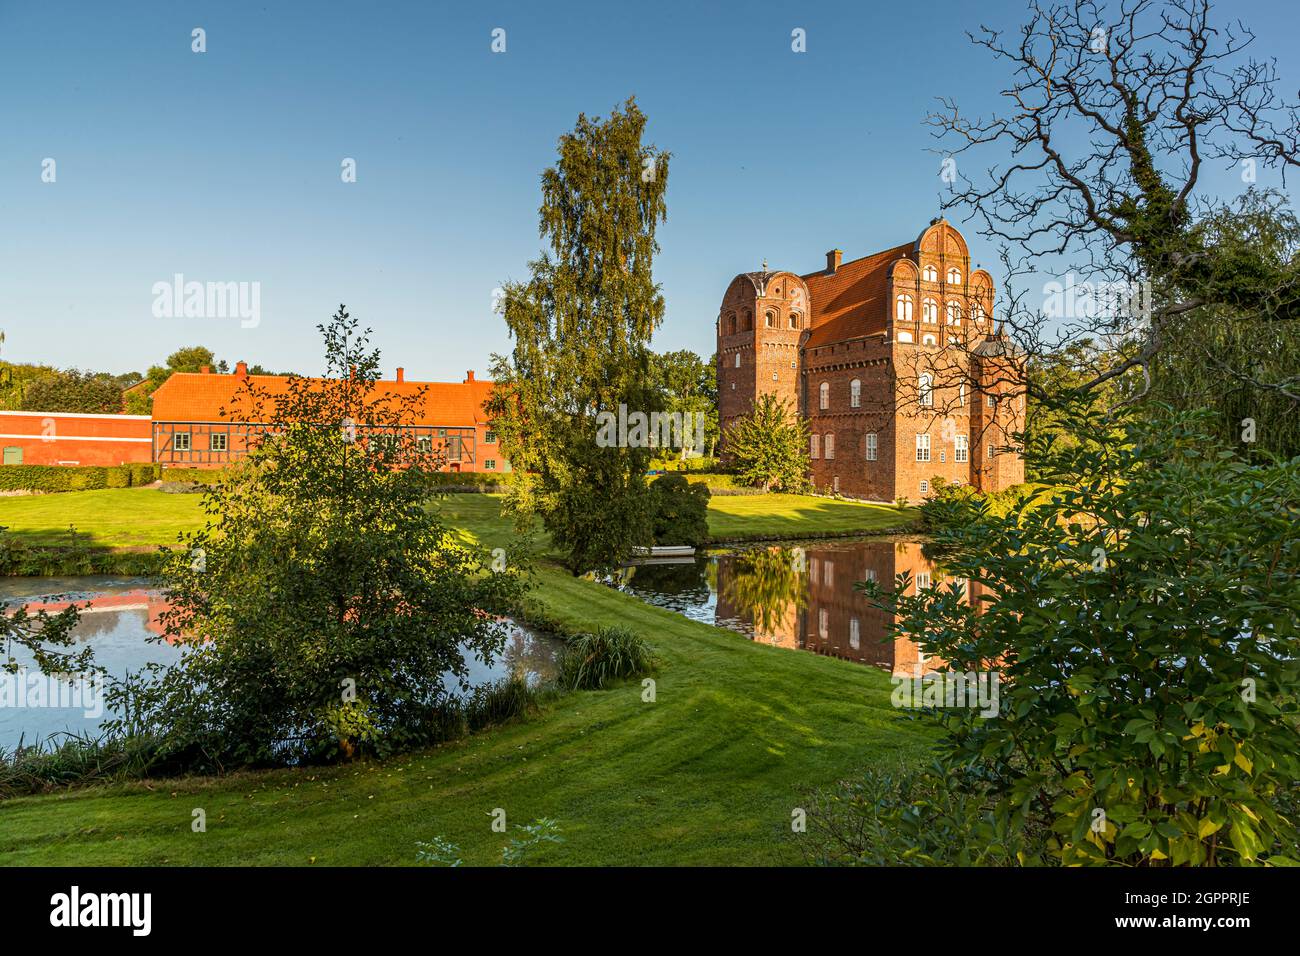 Hesselagergård (Hesselagergaard) Gods, Svendborg. The residence of the Danish line of the Barons of Blixen-Finecke is one of the oldest Renaissance buildings in Denmark. Till today it is still inhabited by members of the family. Stock Photo